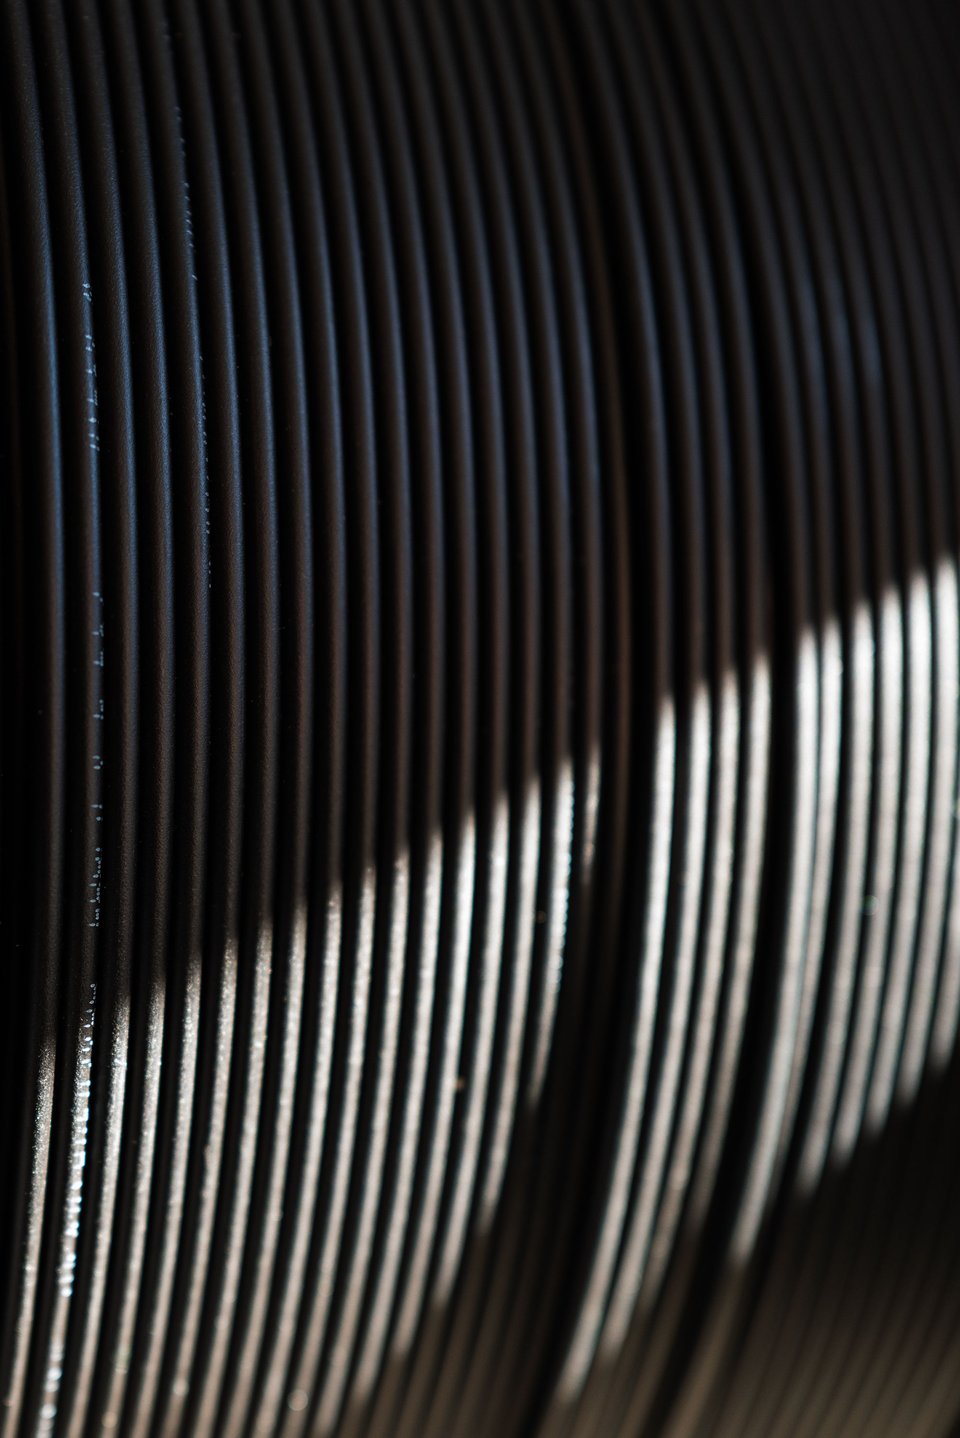 Close-up of a cable drum with black fiber cable with light reflecting off edges, creating a rhythmic, textured pattern.